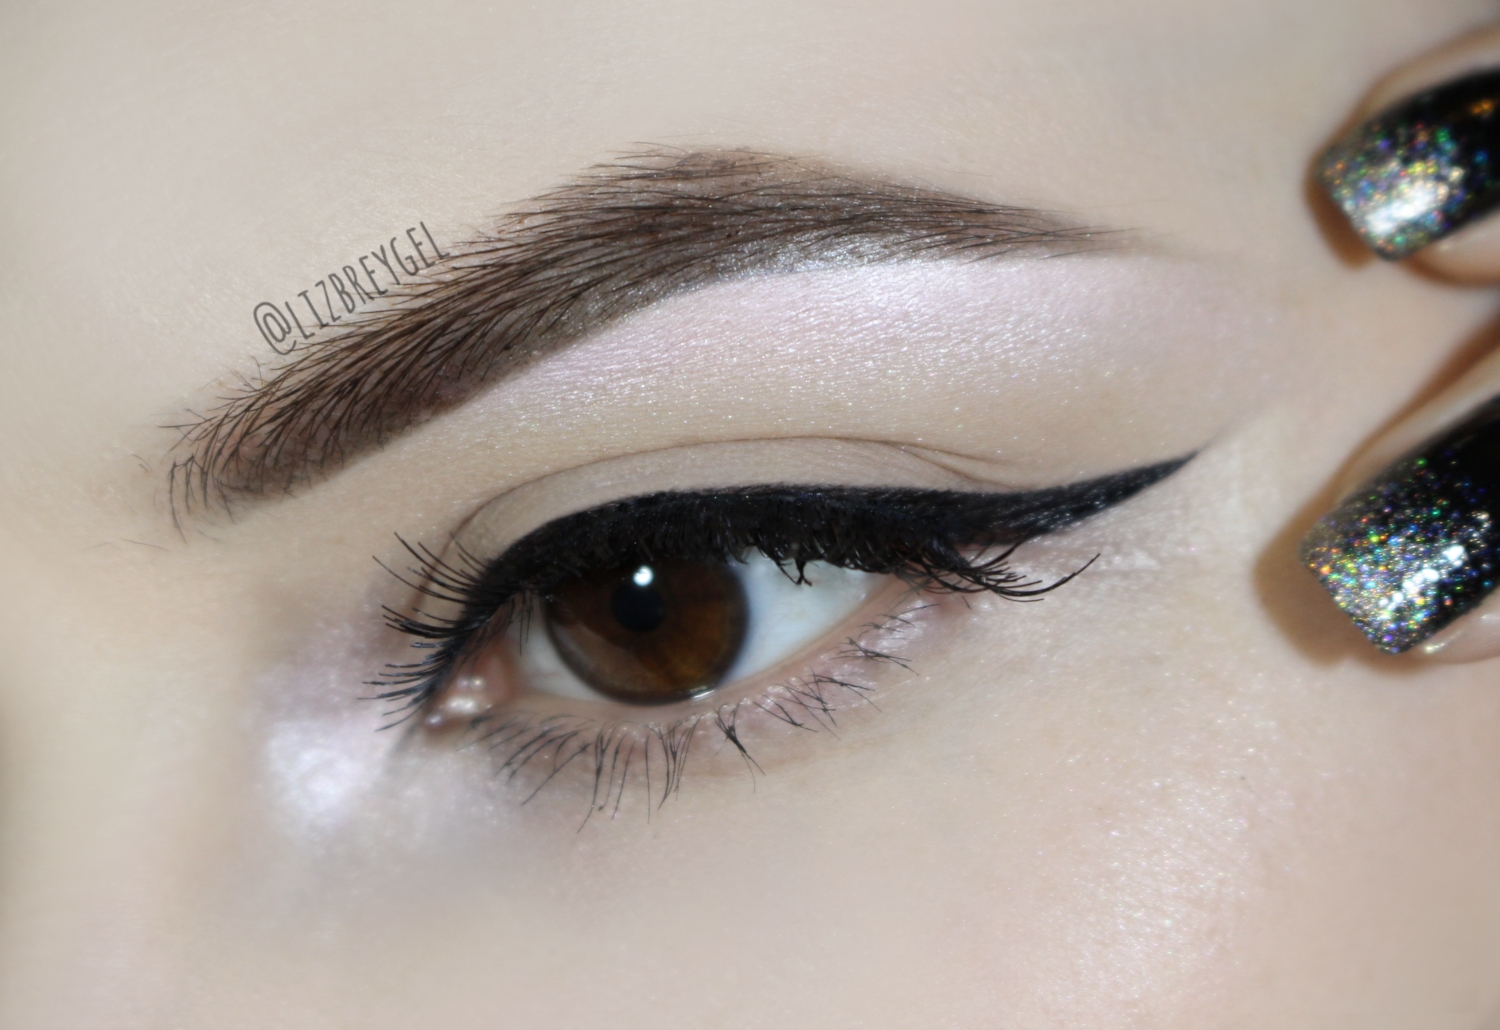 a close-up of a brown eye with a sharp, long eyeliner wing, false lashes and neat eyebrow look